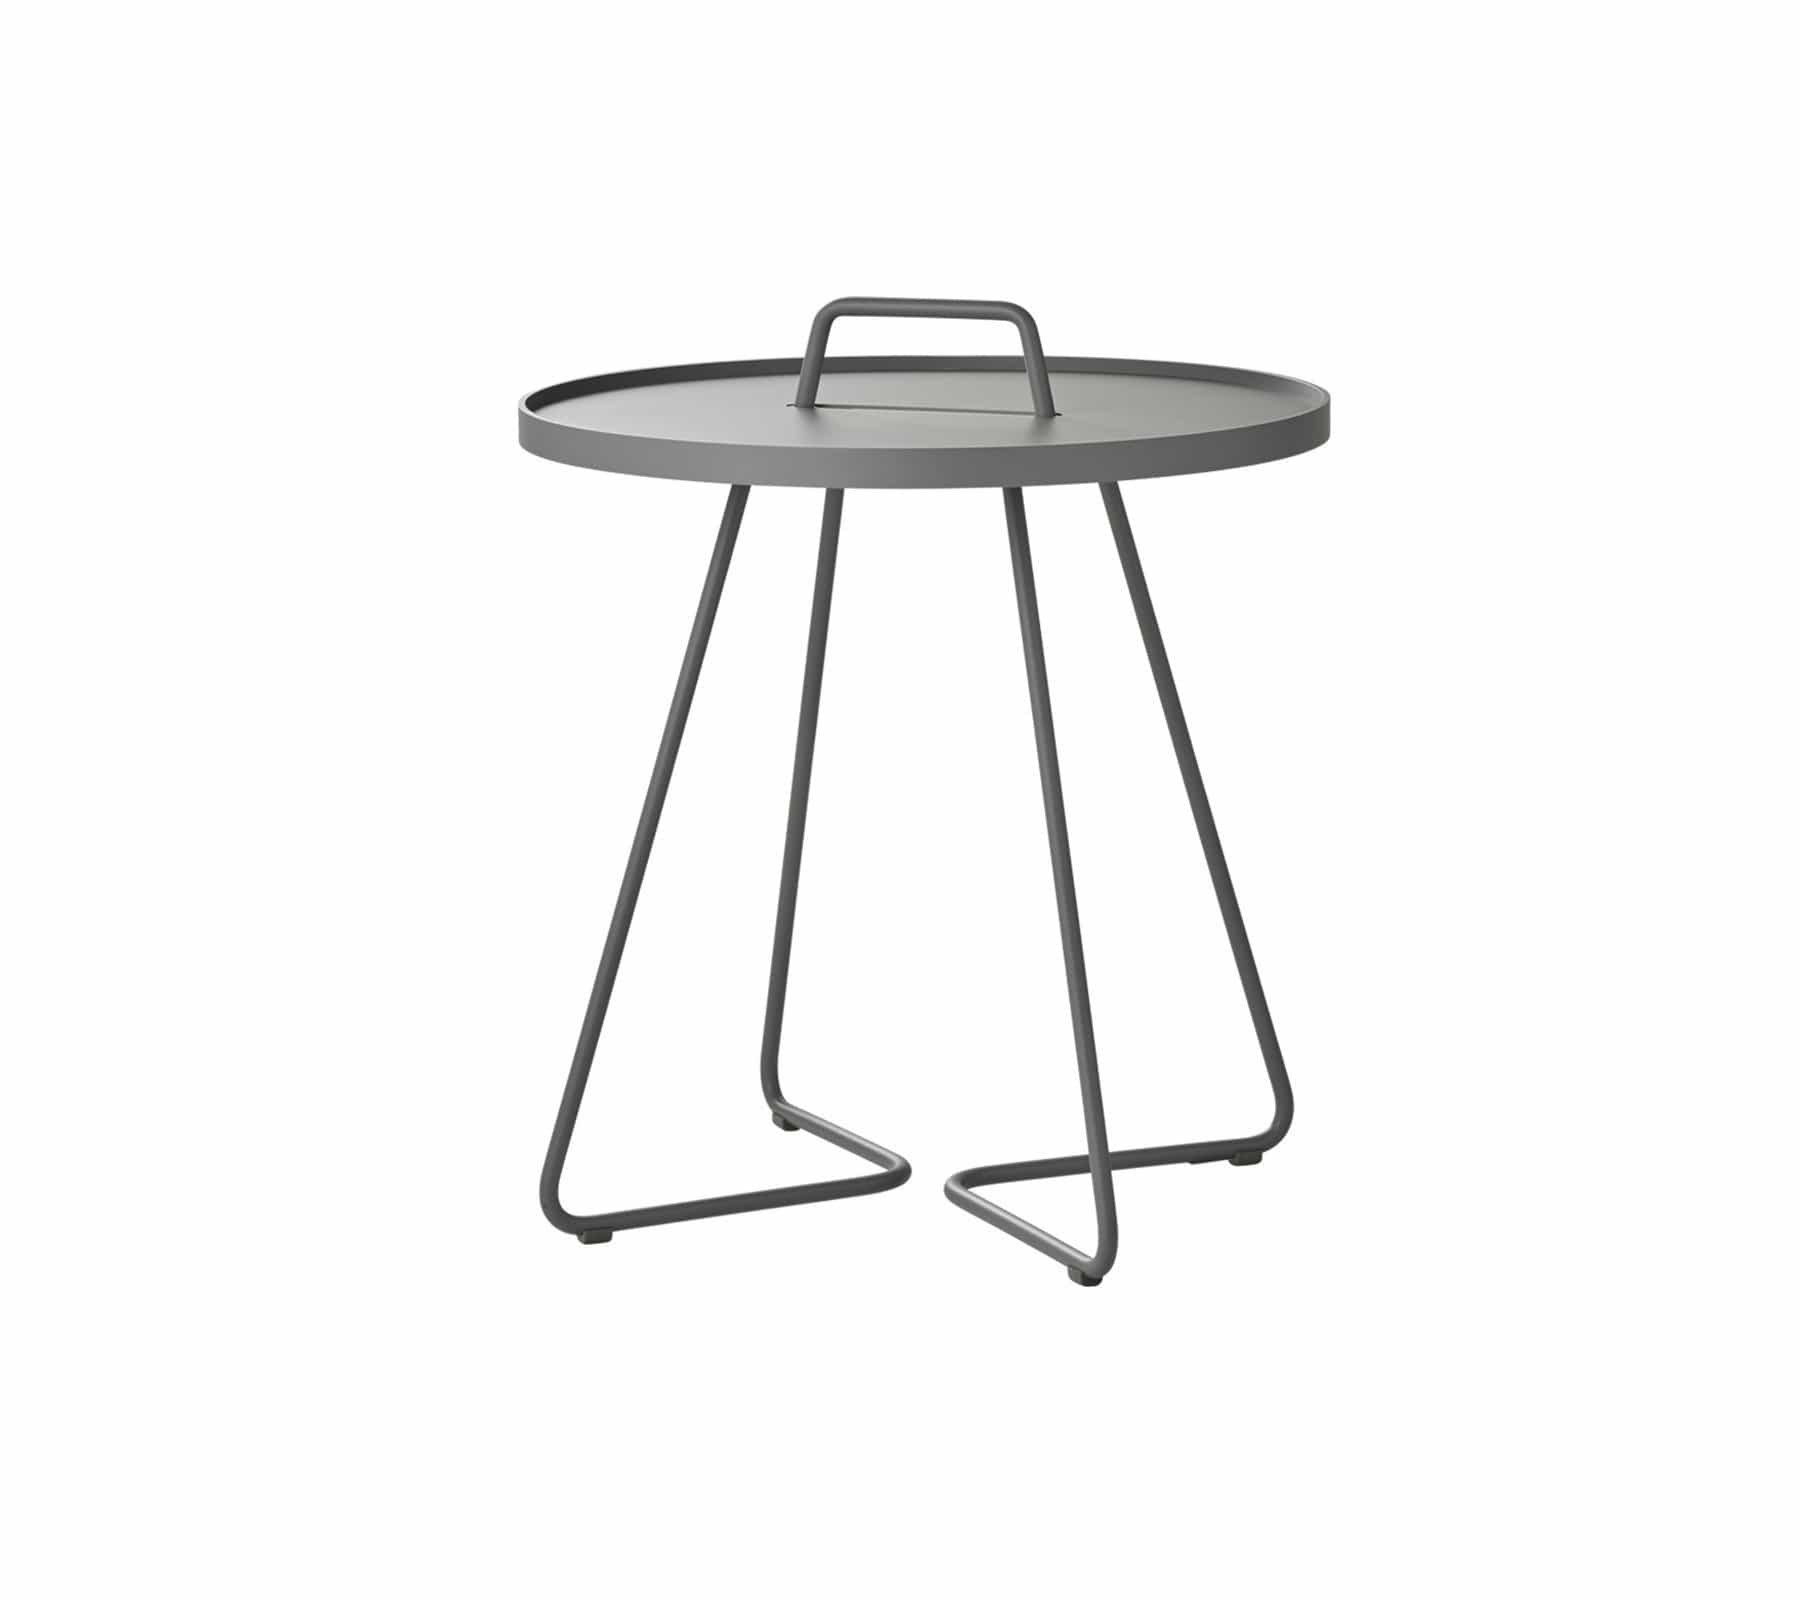 Cane-Line Denmark Outdoor Side Table Light Grey Cane-Line On-the-move side table large